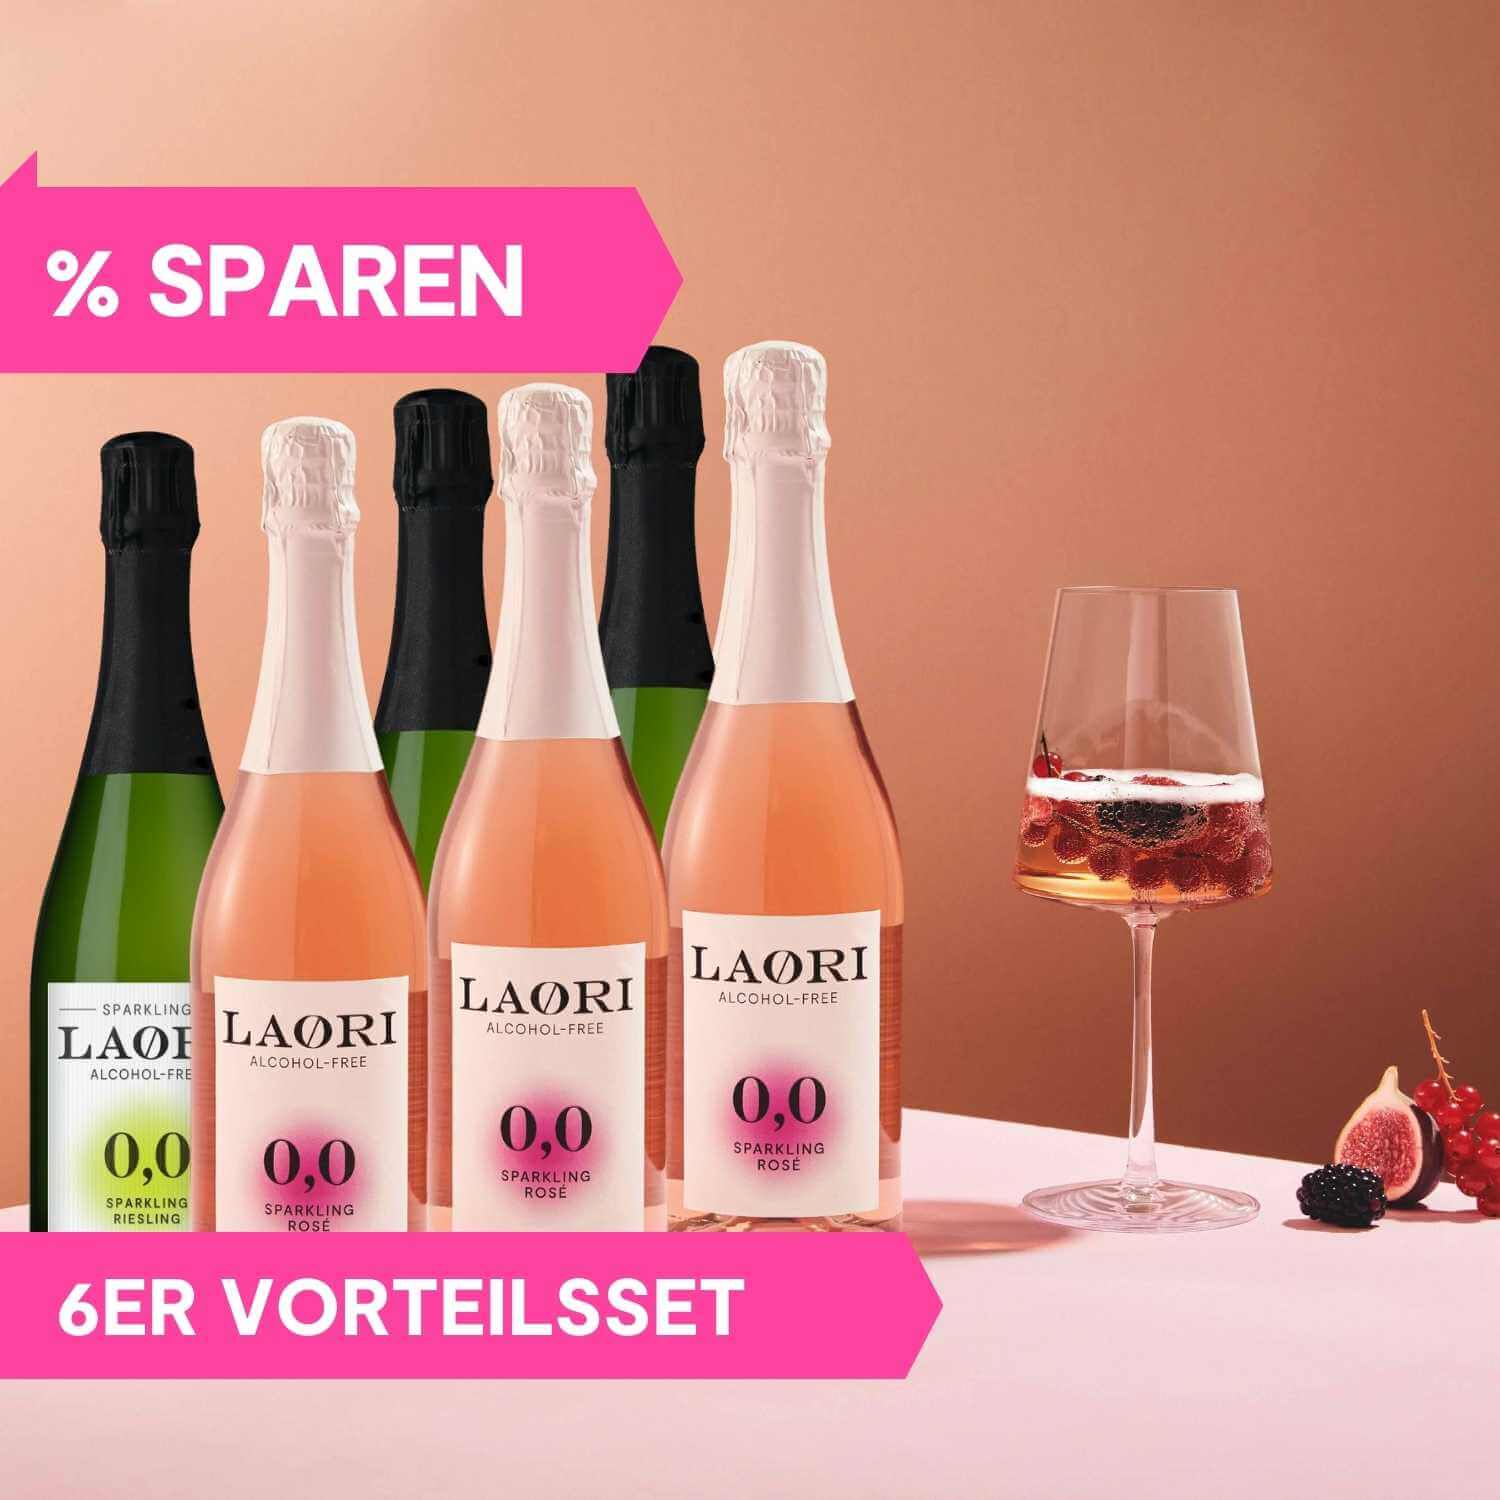 Best of Both Worlds - 3x Sparkling Riesling + 3x Sparkling Rosé - 750 ml